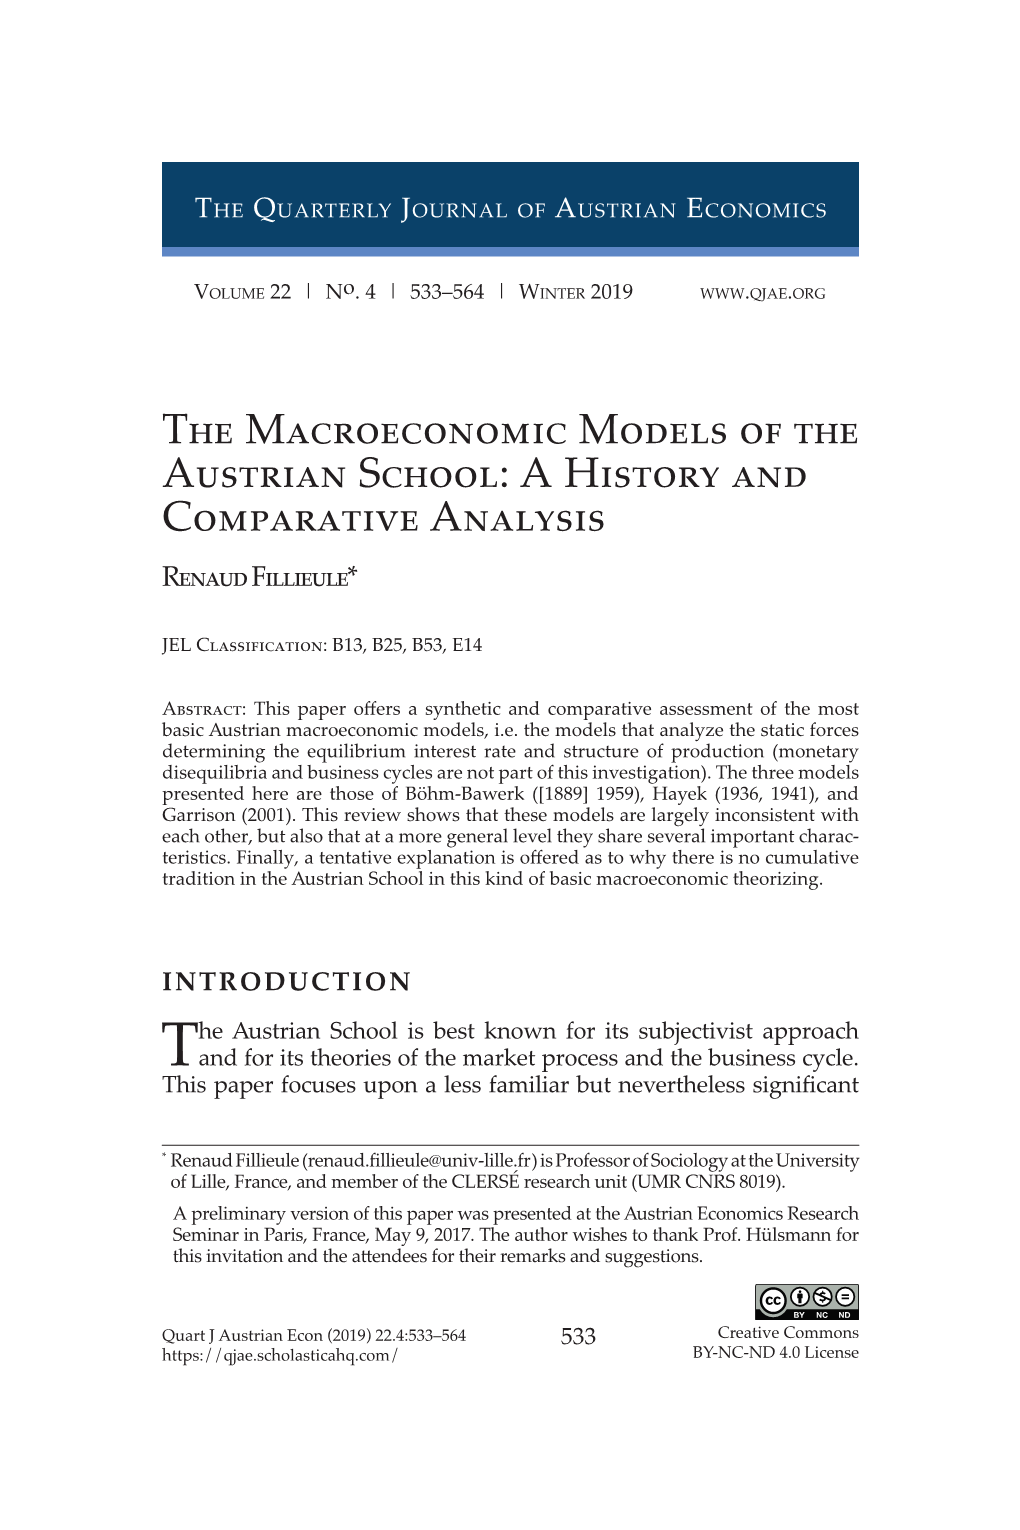 The Macroeconomic Models of the Austrian School: a History and Comparative Analysis Renaud Fillieule*